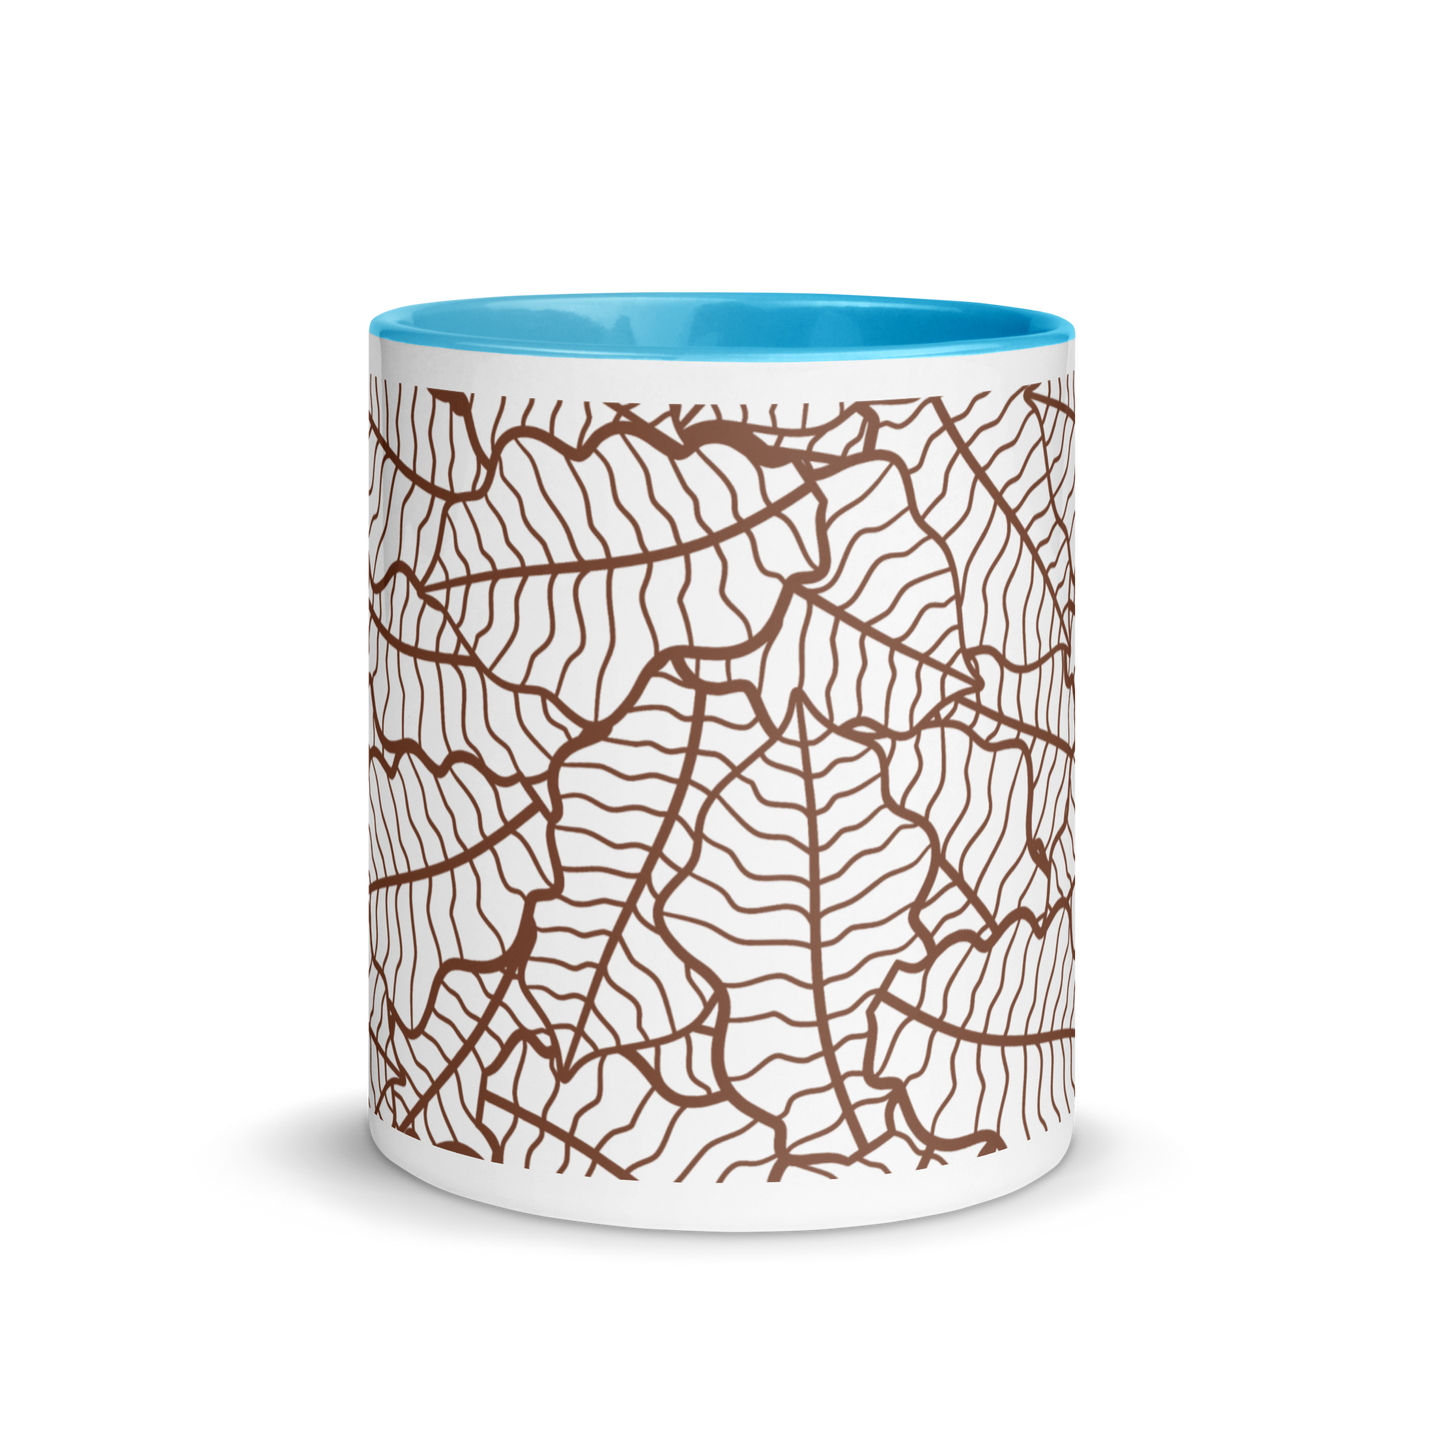 Colorful Fall Leaves | Seamless Patterns | White Ceramic Mug with Color Inside - #5